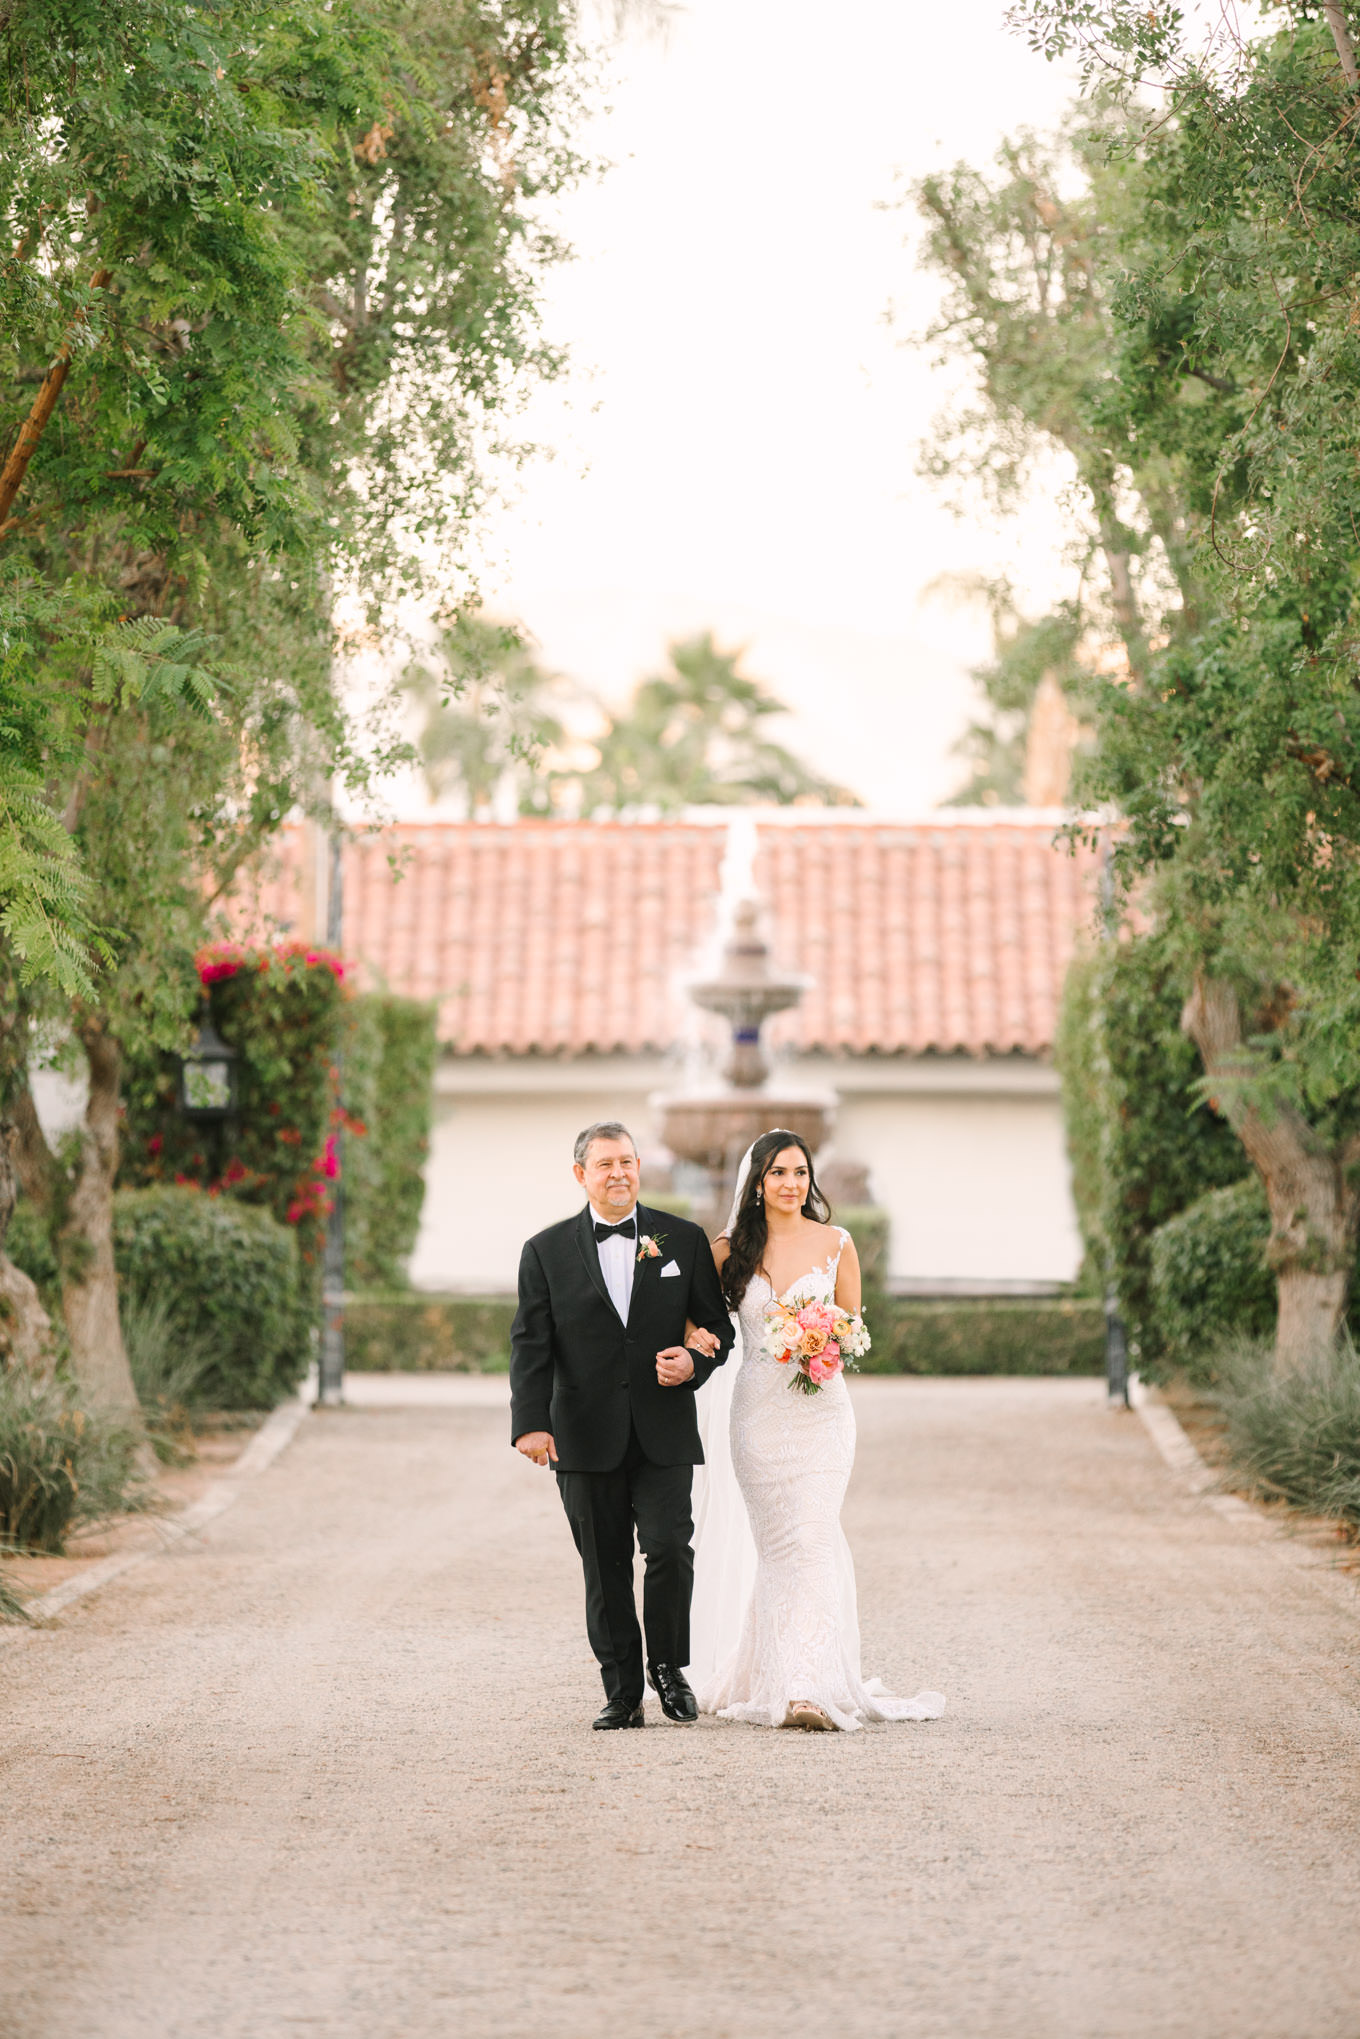 Bride with father | Pink Bougainvillea Estate wedding | Colorful LA wedding photography | #bougainvilleaestate #palmspringswedding #palmspringsweddingvenue #palmspringsphotographer Source: Mary Costa Photography | Los Angeles